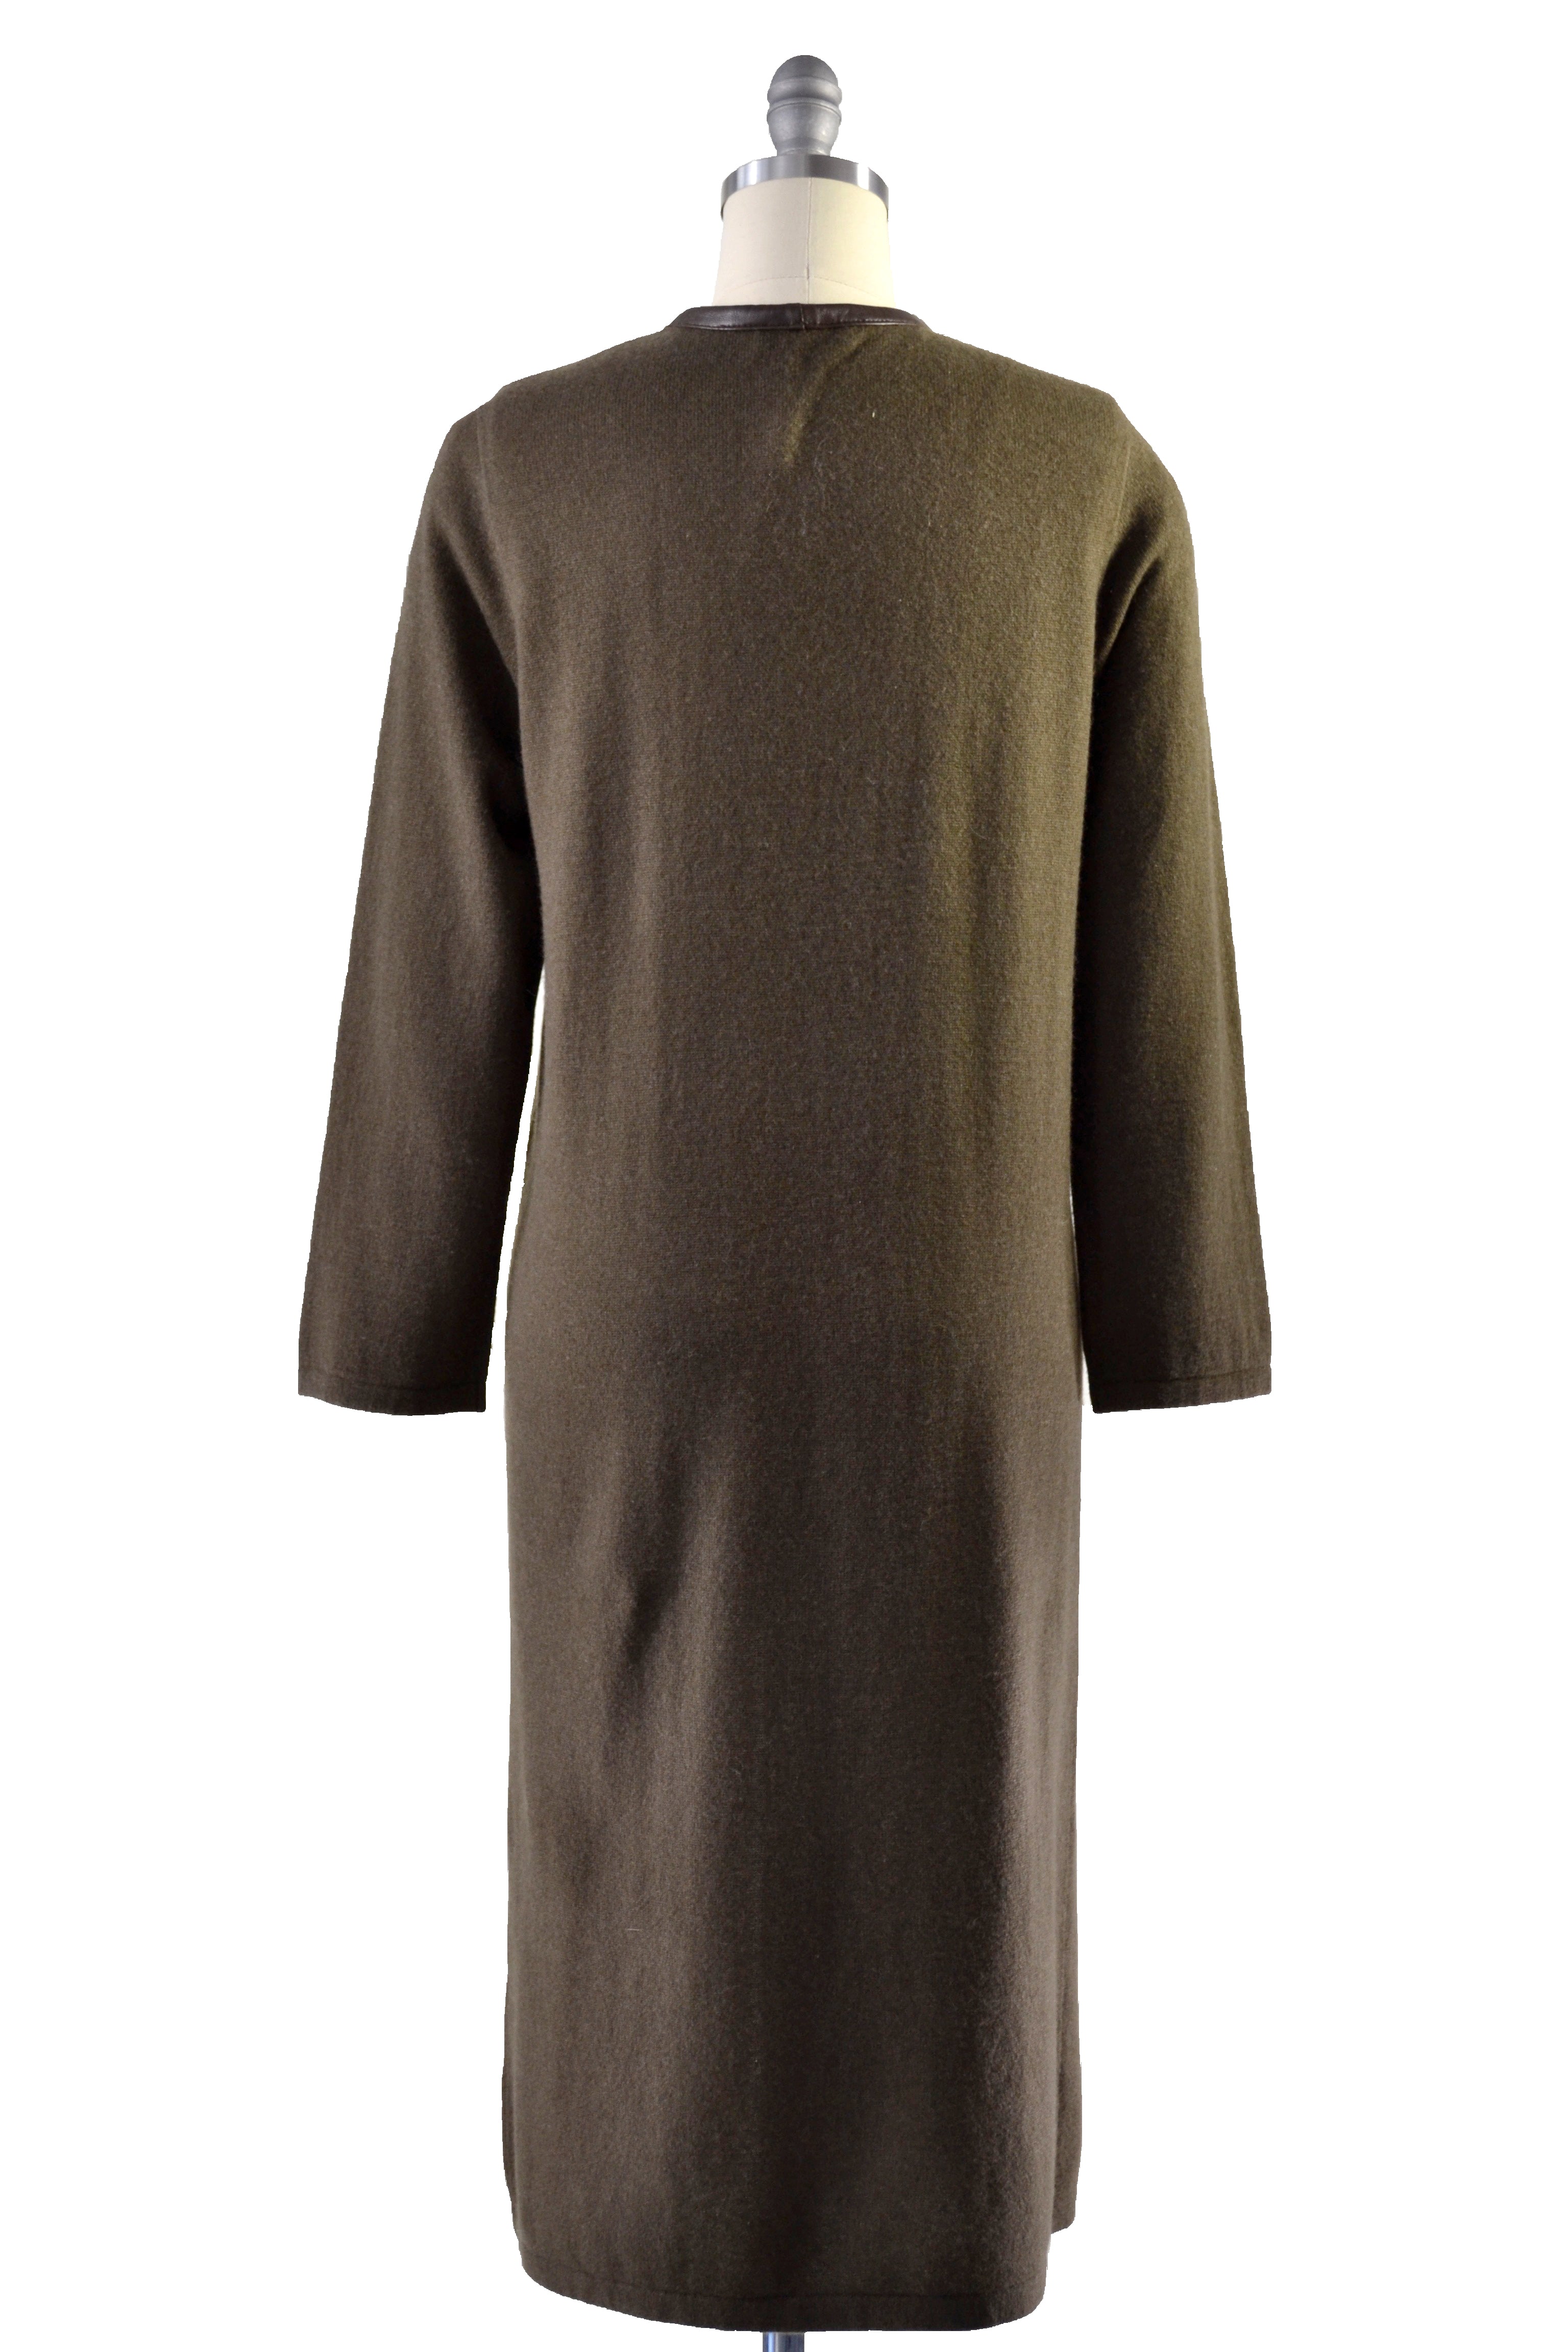 Cashmere Duster with Leather Trim in Hunter Green